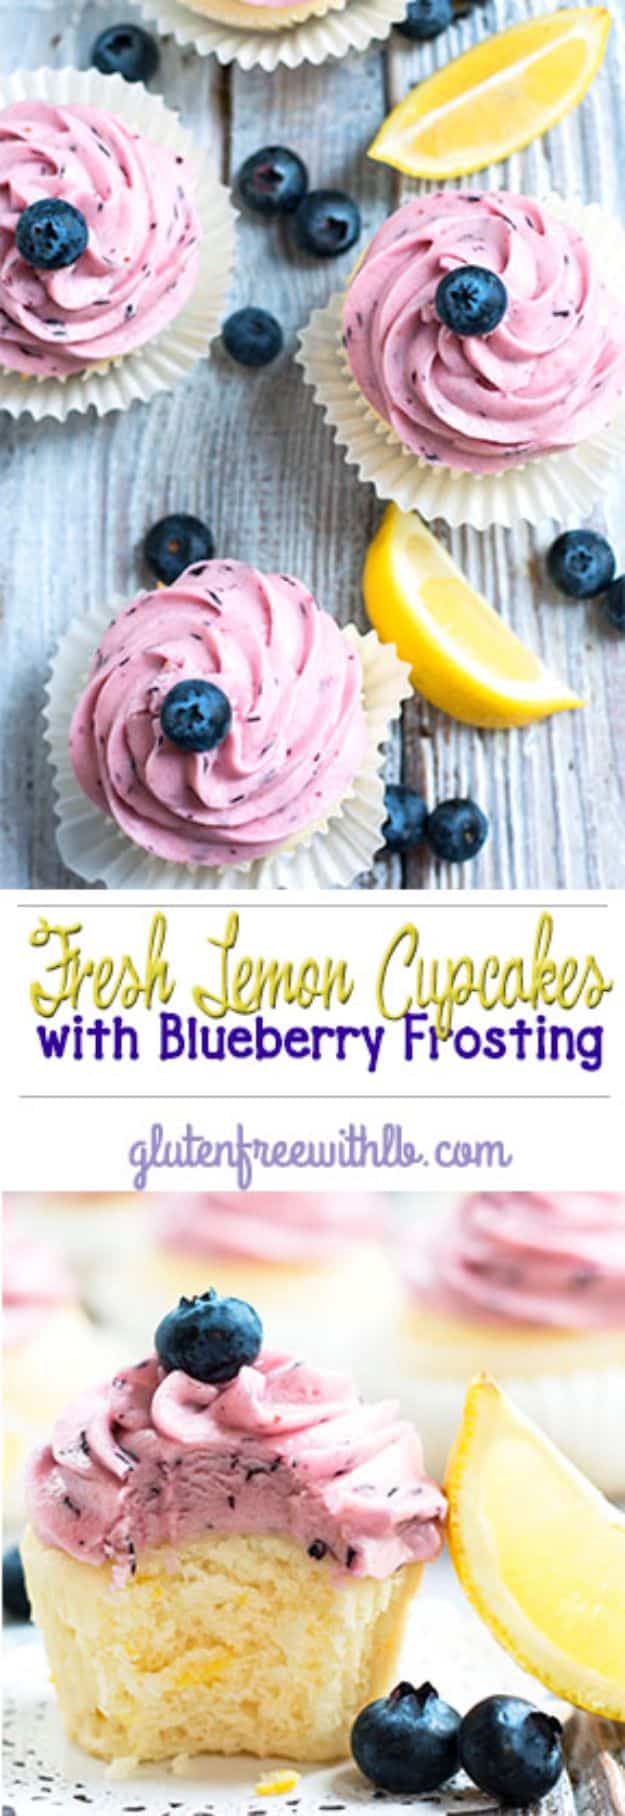 Gluten Free Desserts - Fresh Lemon Cupcakes With Blueberry Frosting - Easy Recipes and Healthy Recipe Ideas for Cookies, Cake, Pie, Cupcakes, Cheesecake and Ice Cream - Best No Sugar Glutenfree Chocolate, No Bake Dessert, Fruit, Peach, Apple and Banana Dishes - Flourless Christmas, Thanksgiving and Holiday Dishes #glutenfree #desserts #recipes